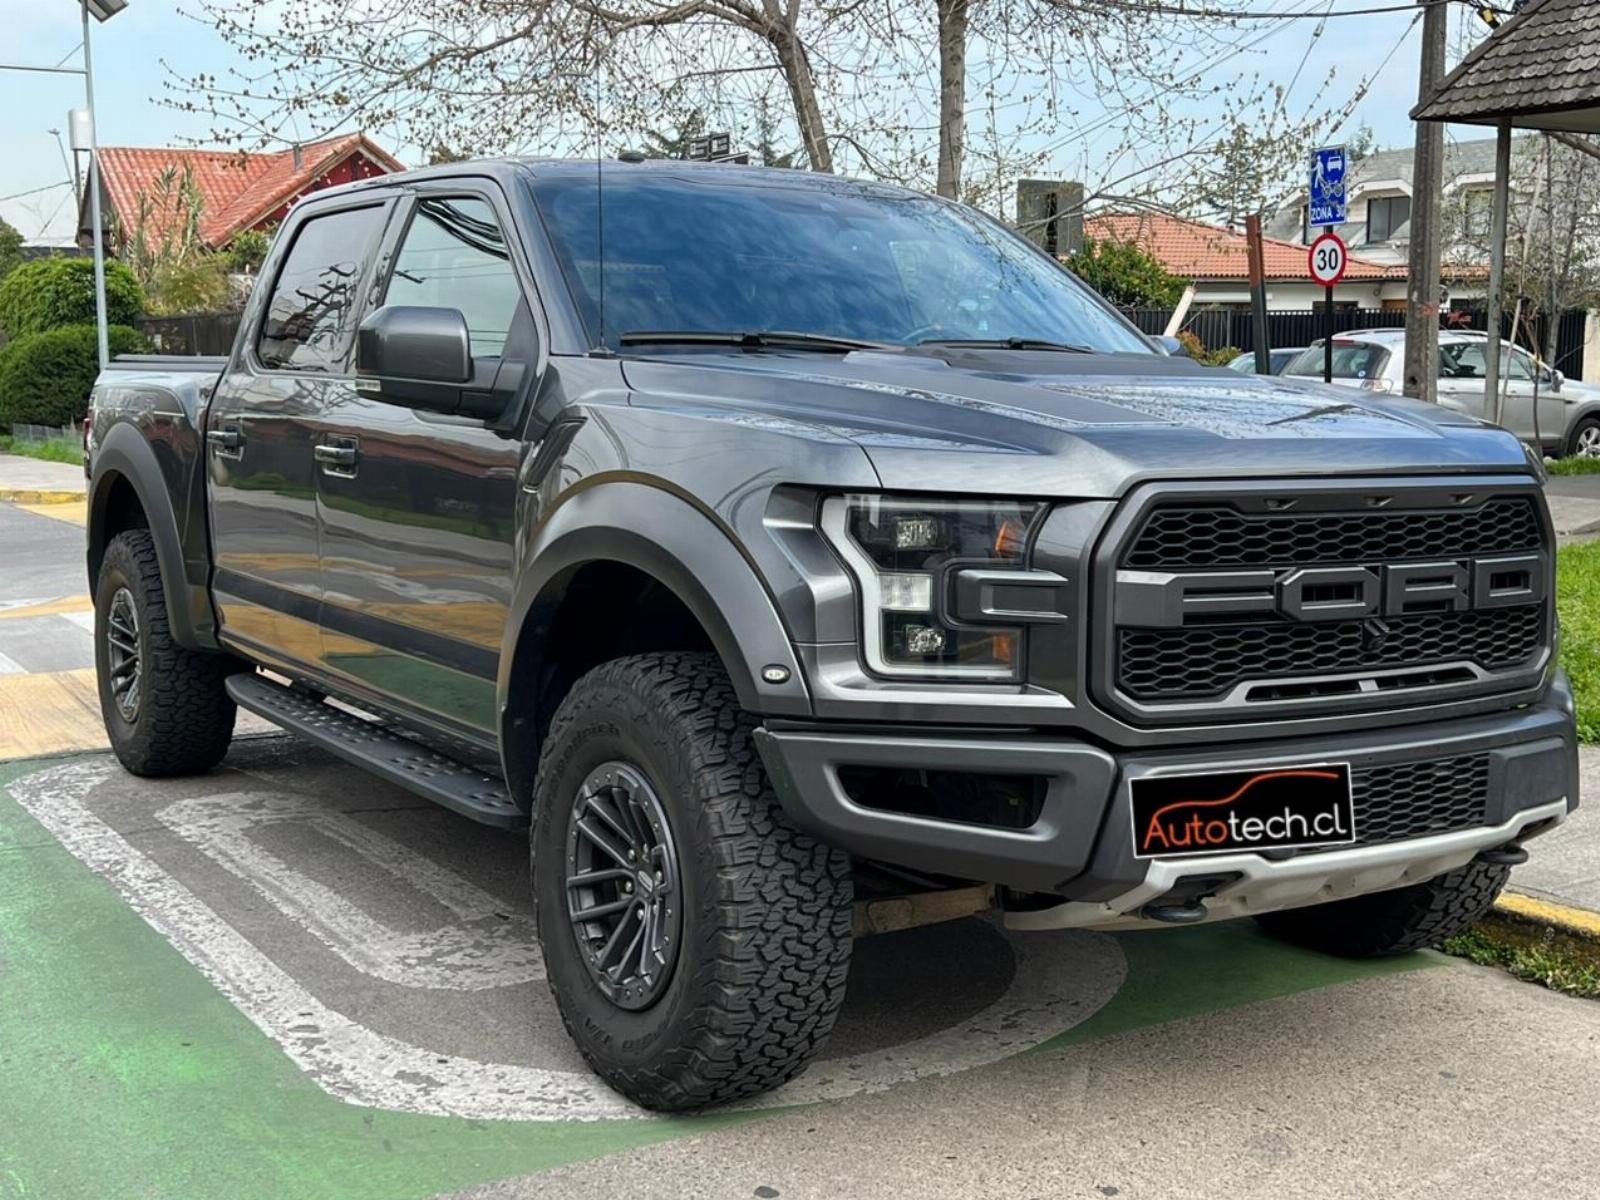 FORD F-150 Ford F-150 3.5 Raptor Auto Ecoboost 4WD 2021 Ford F-150 3.5 Raptor Auto Ecoboost 4WD - FULL MOTOR